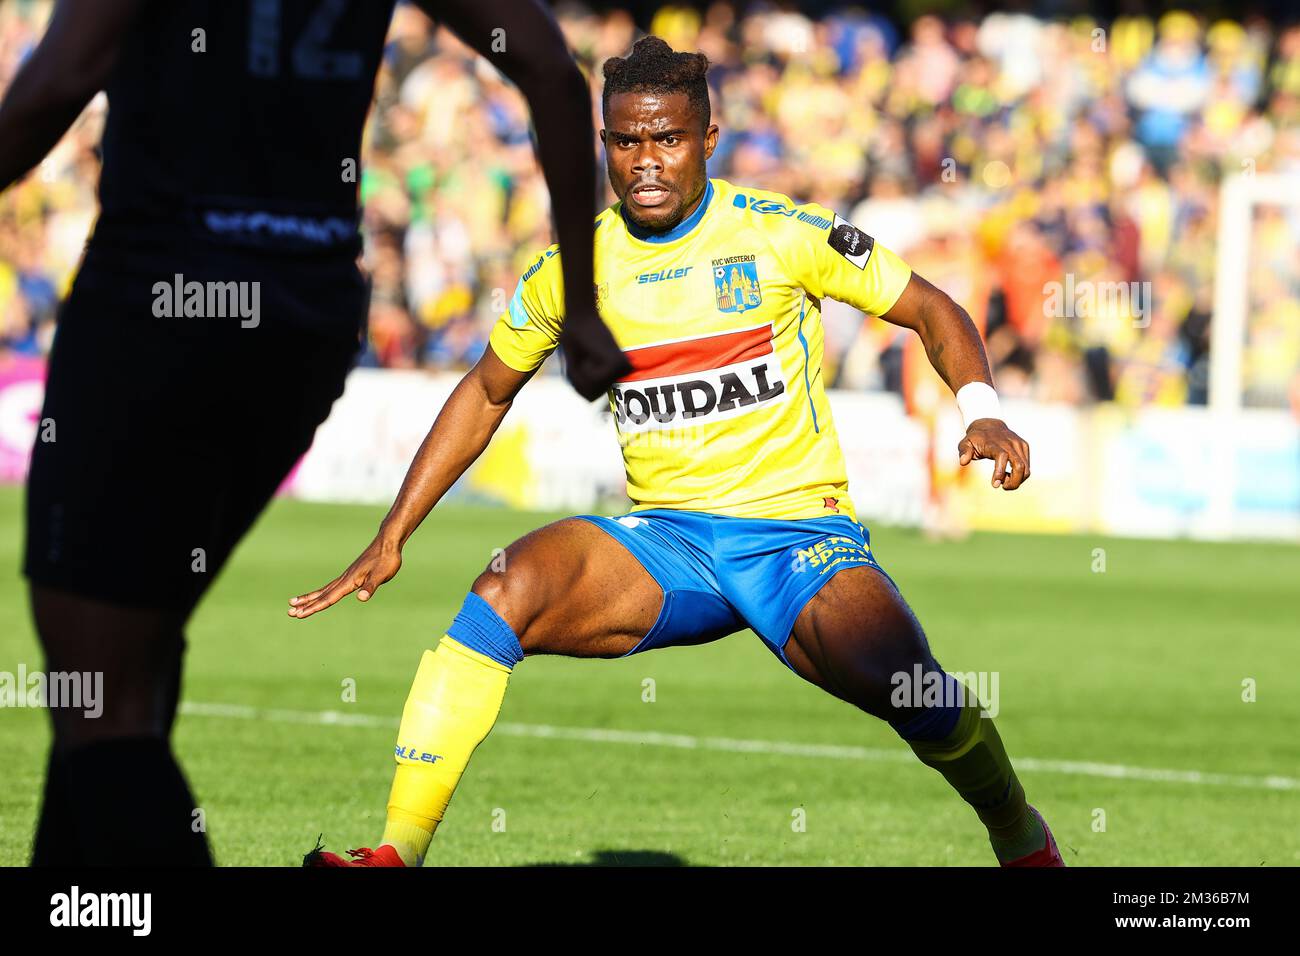 Westerlo's Kouya Mabea pictured in action during a soccer match between KVC Westerlo and Royal Excelsior Virton, Sunday 24 October 2021 in Westerlo, on day 9 of the '1B Pro League' second division of the Belgian soccer championship. BELGA PHOTO DAVID PINTENS Stock Photo